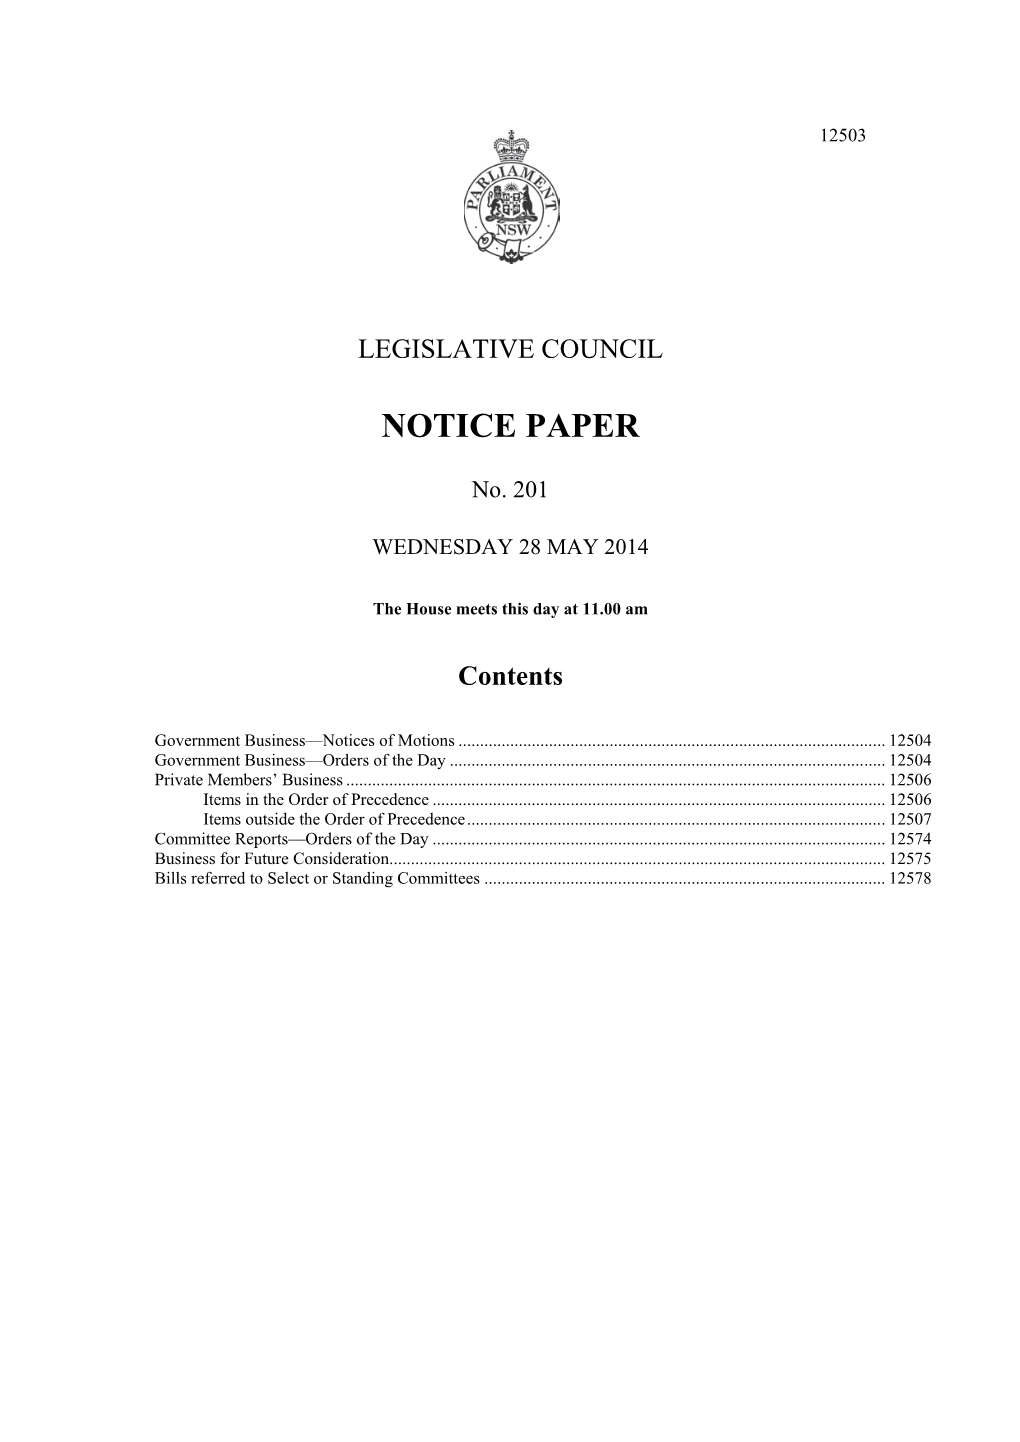 Notice Paper No. 201—Wednesday 28 May 2014